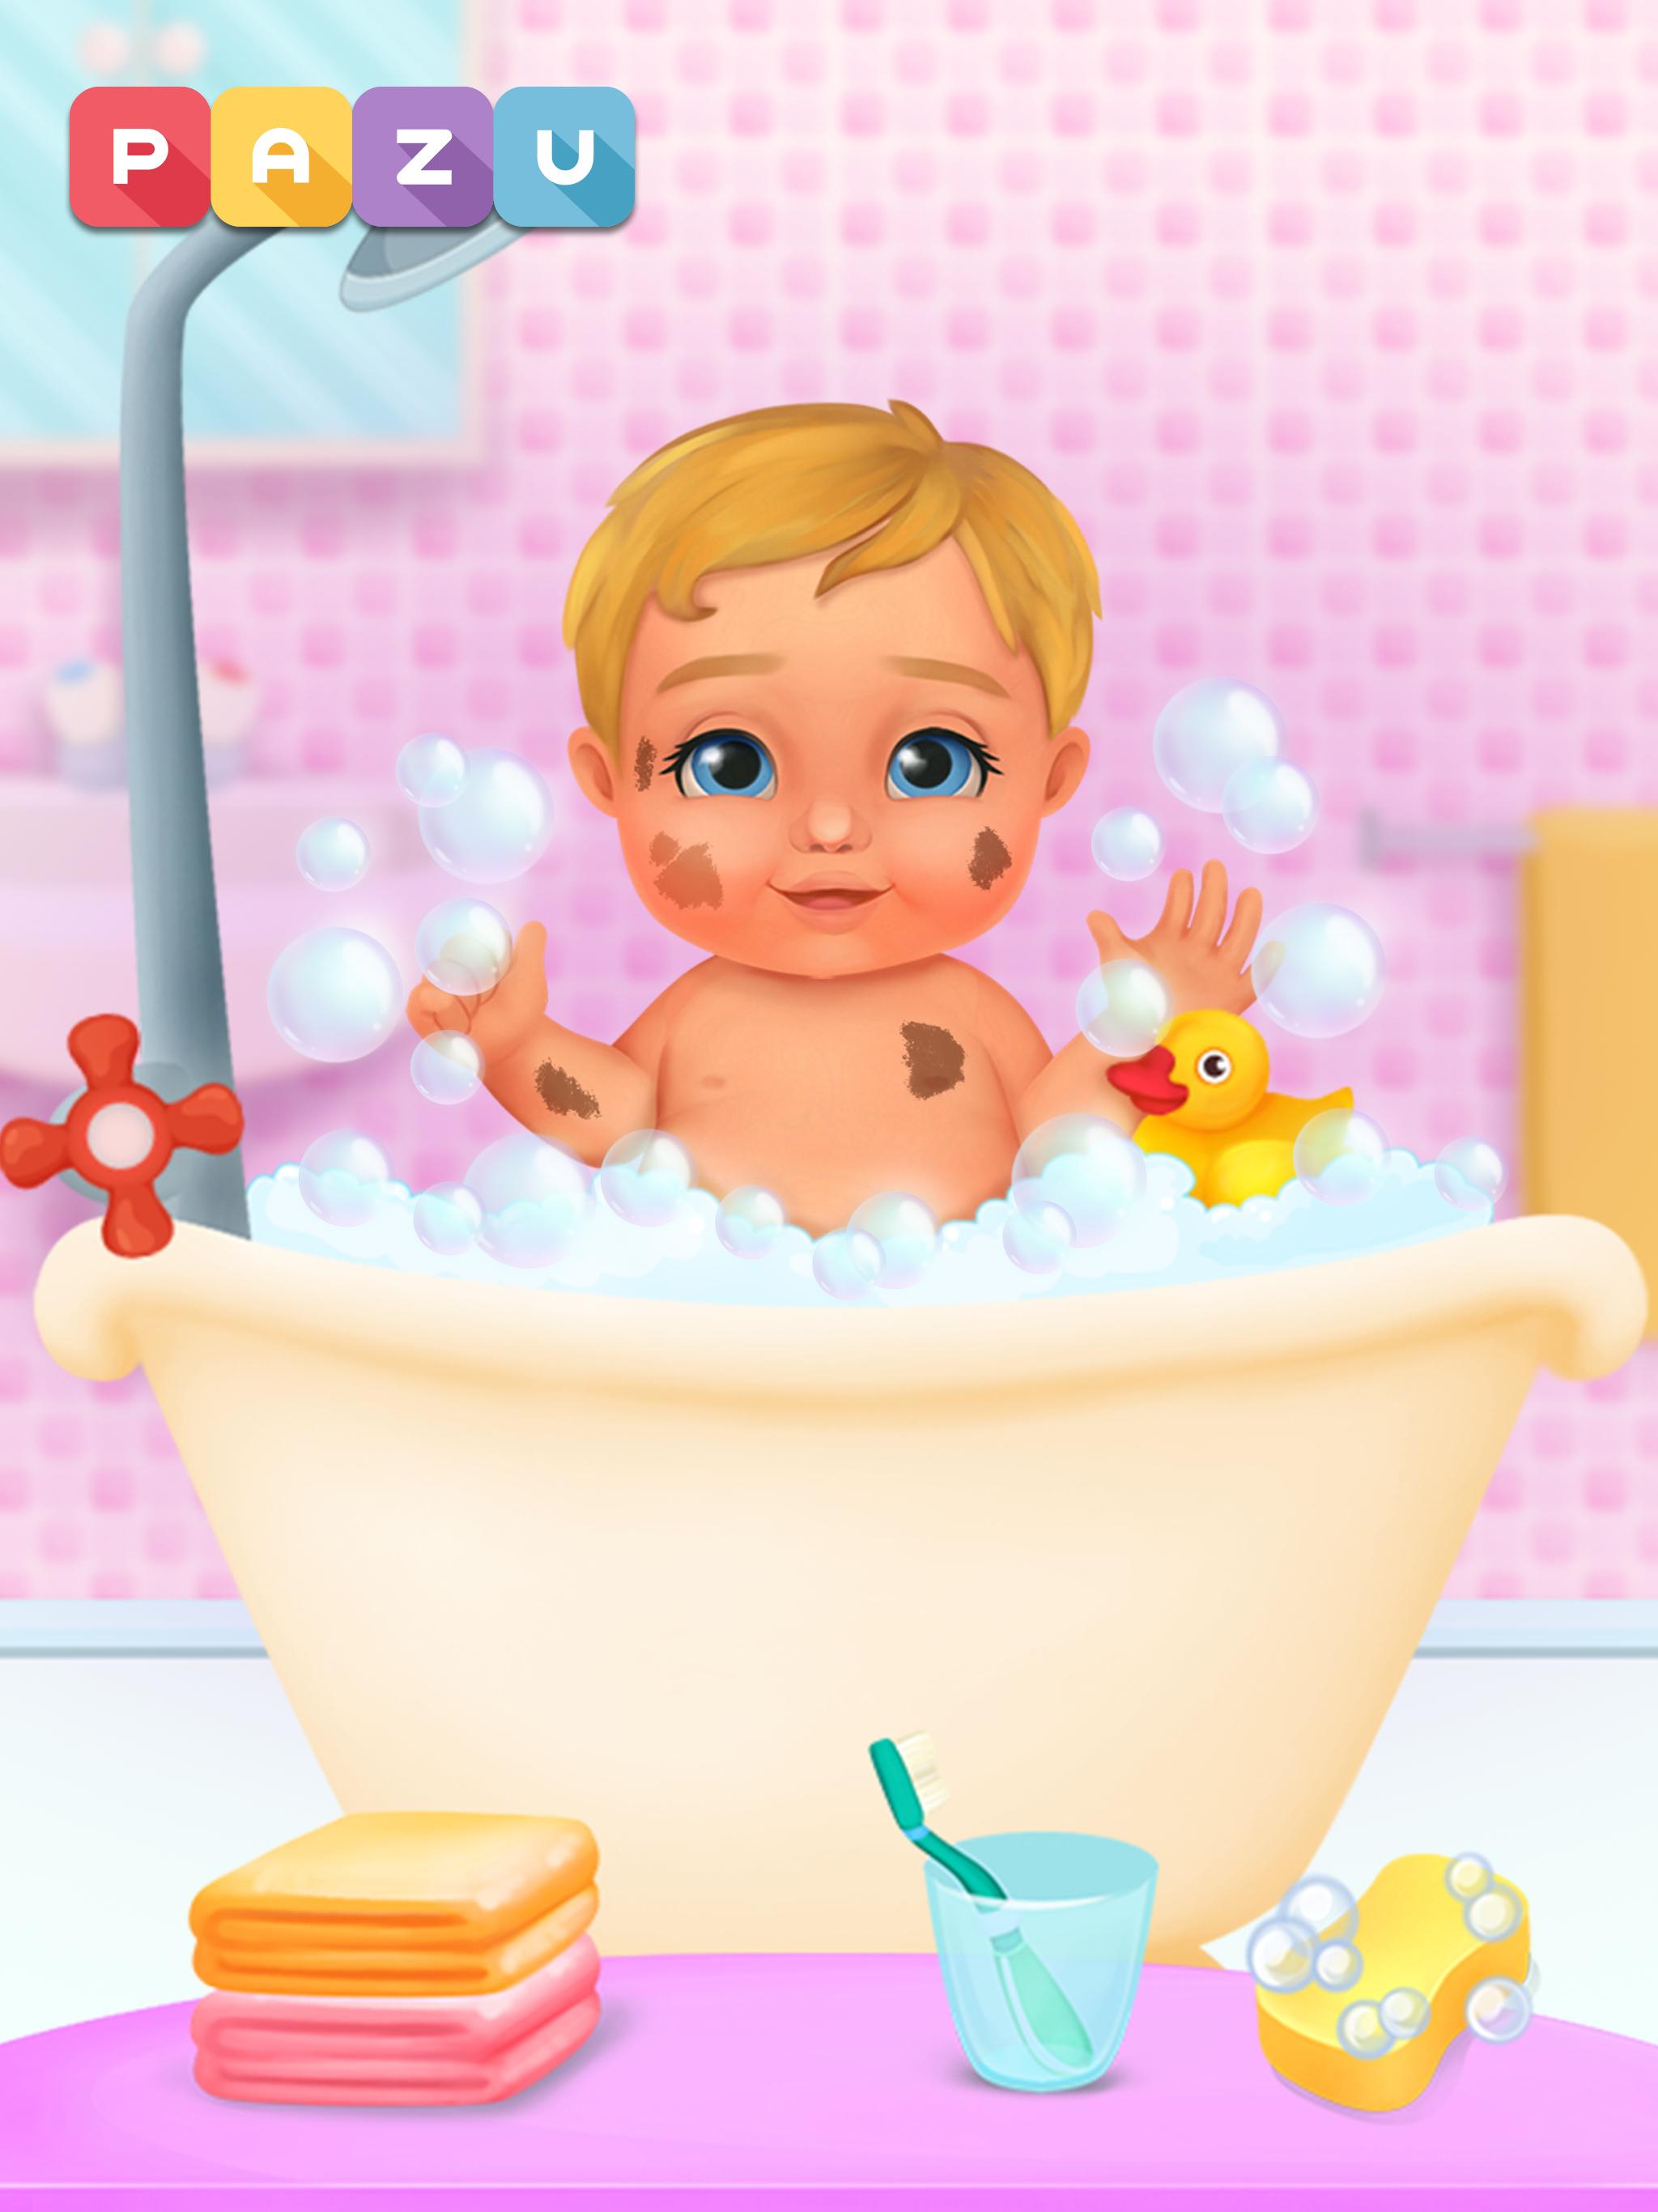 Chic Baby 2 Dress up & baby care games for kids 1.02 Screenshot 14